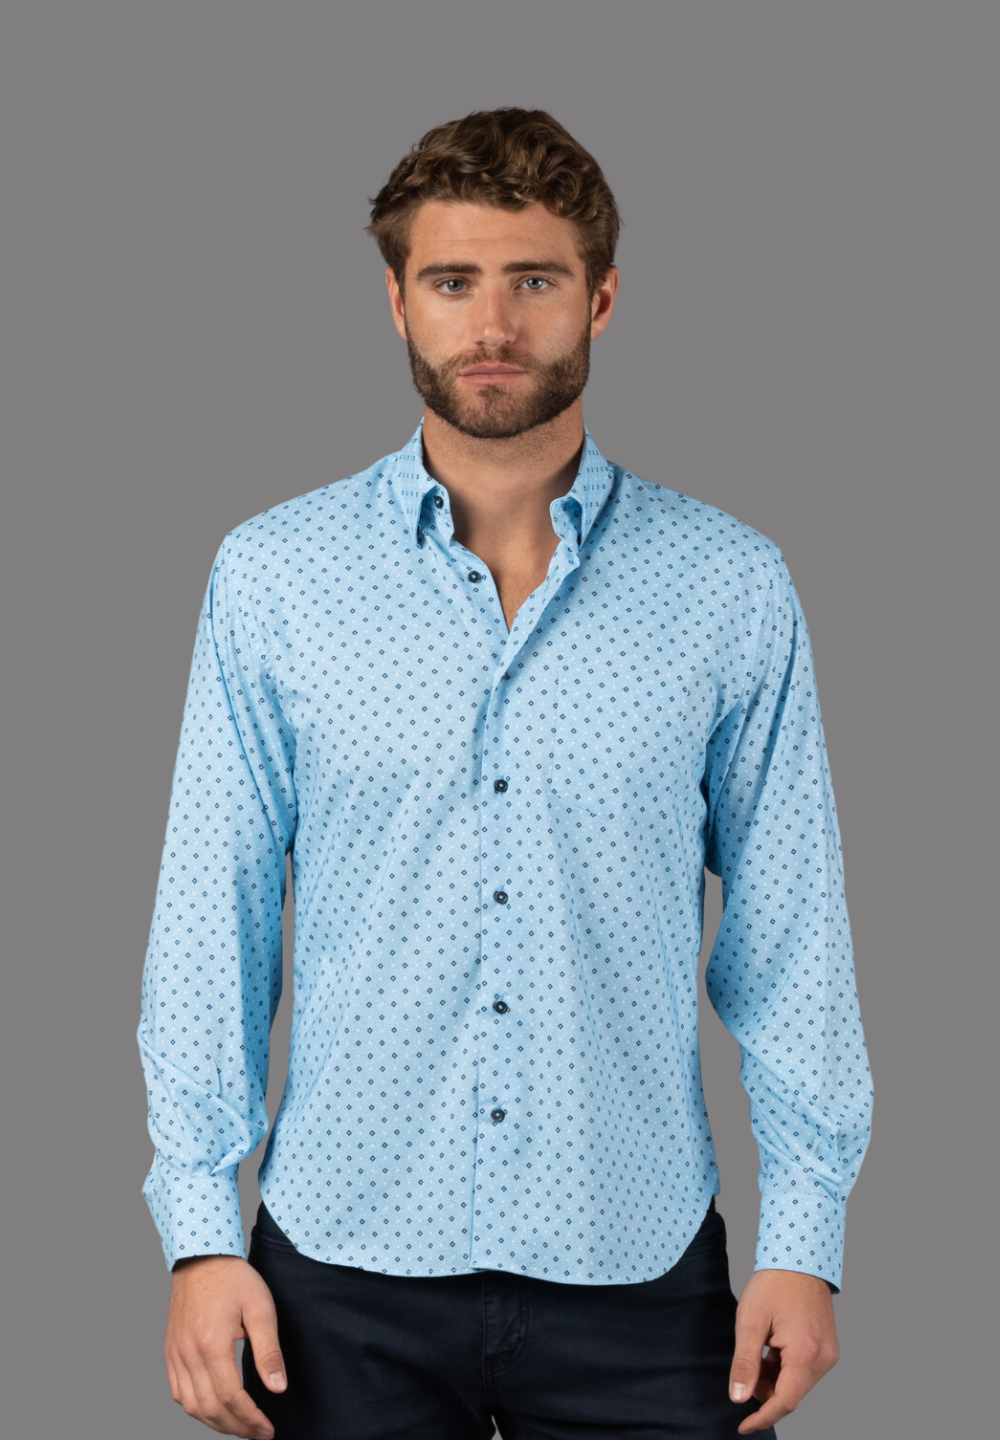 Powder Blue with Navy and White Box Shirt